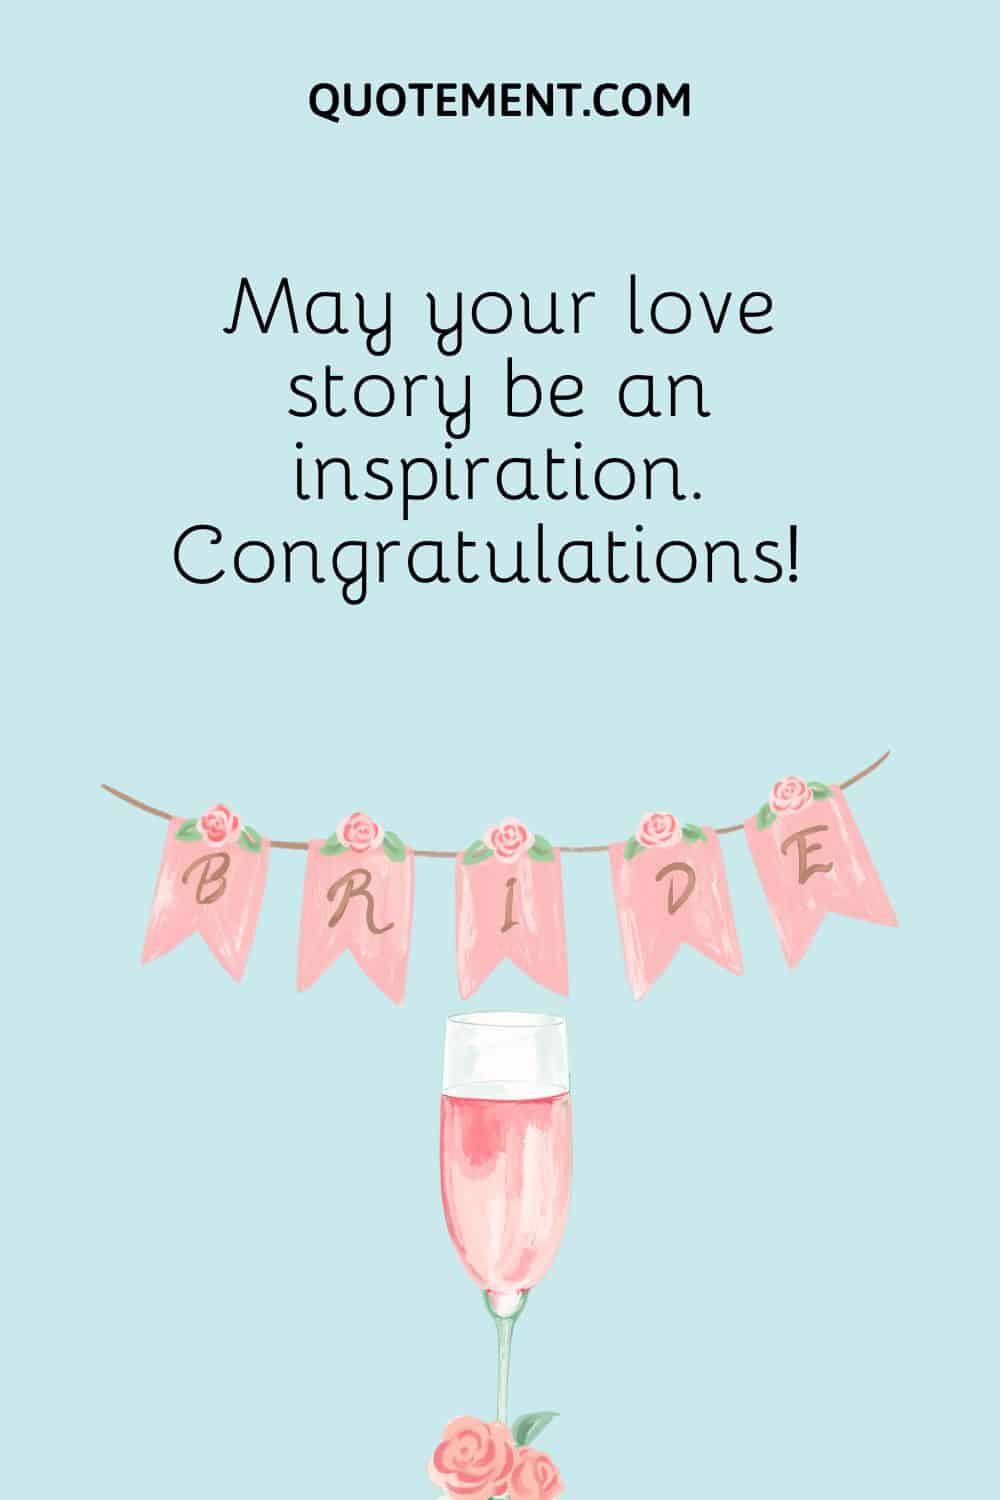 May your love story be an inspiration. Congratulations!